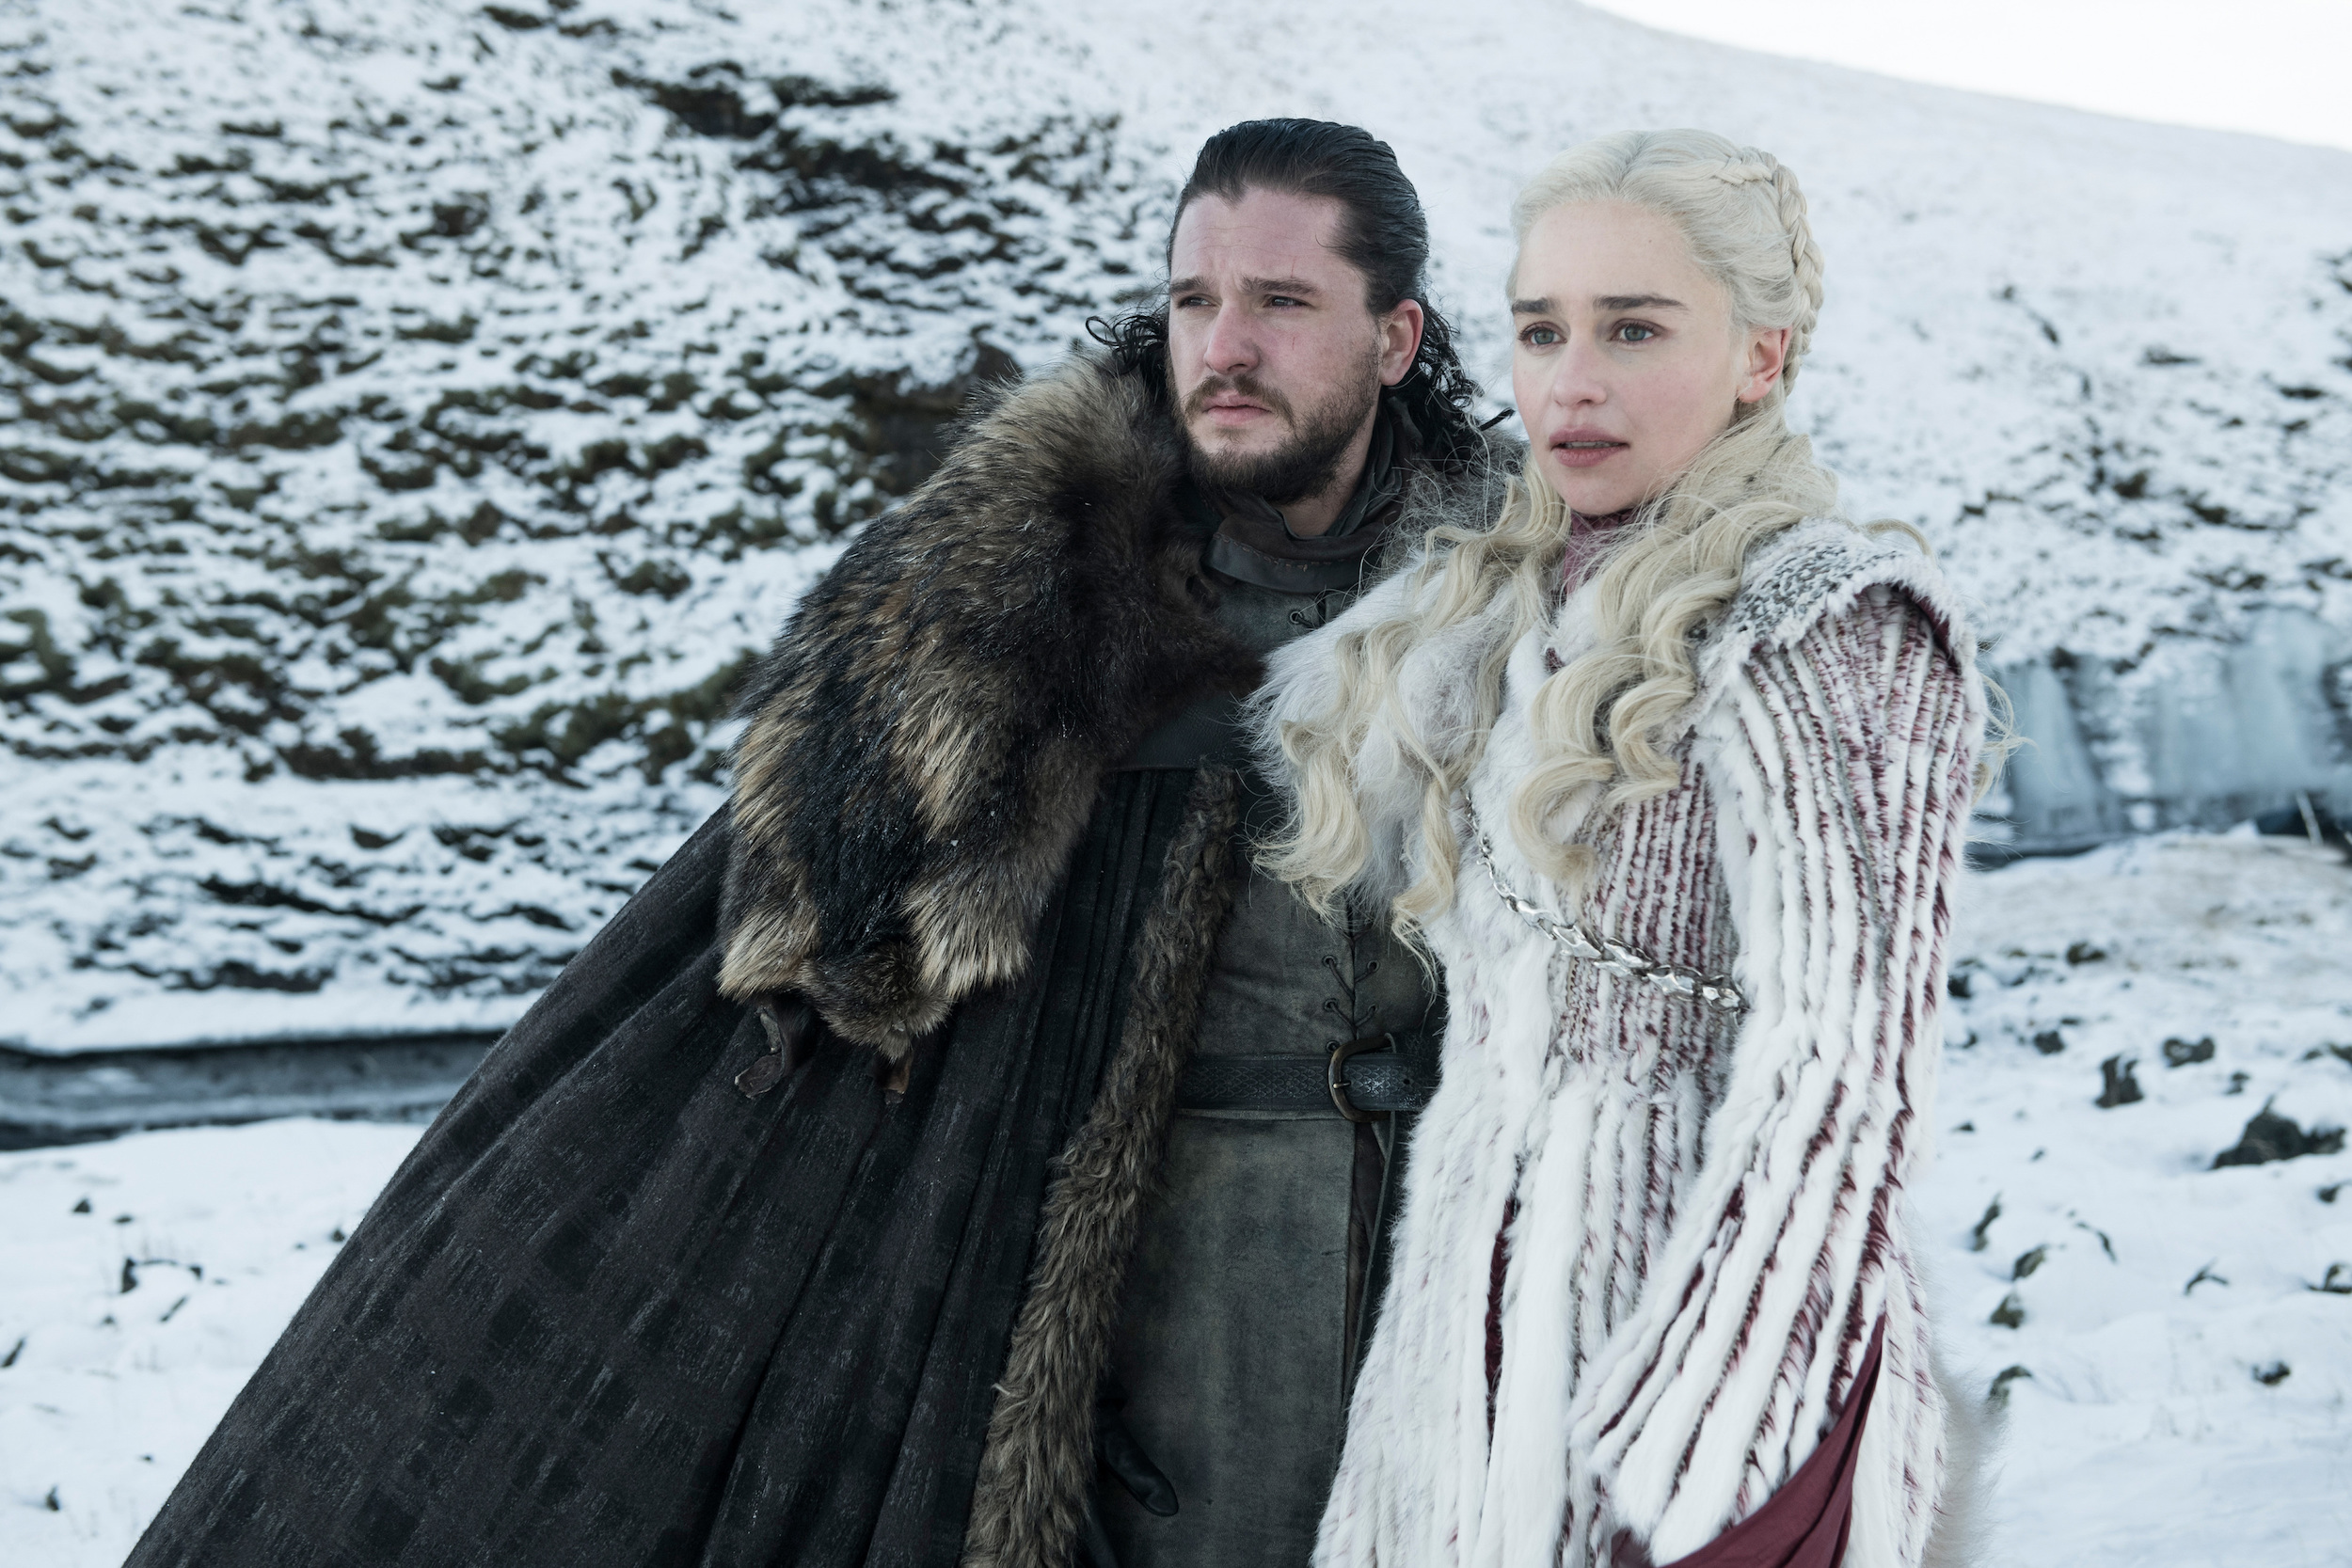 Kit Harington and Emilia Clarke as Jon Snow and Daenerys Targaryen in Game of Thrones. They’re standing in a snowfield, dressed in furs. 